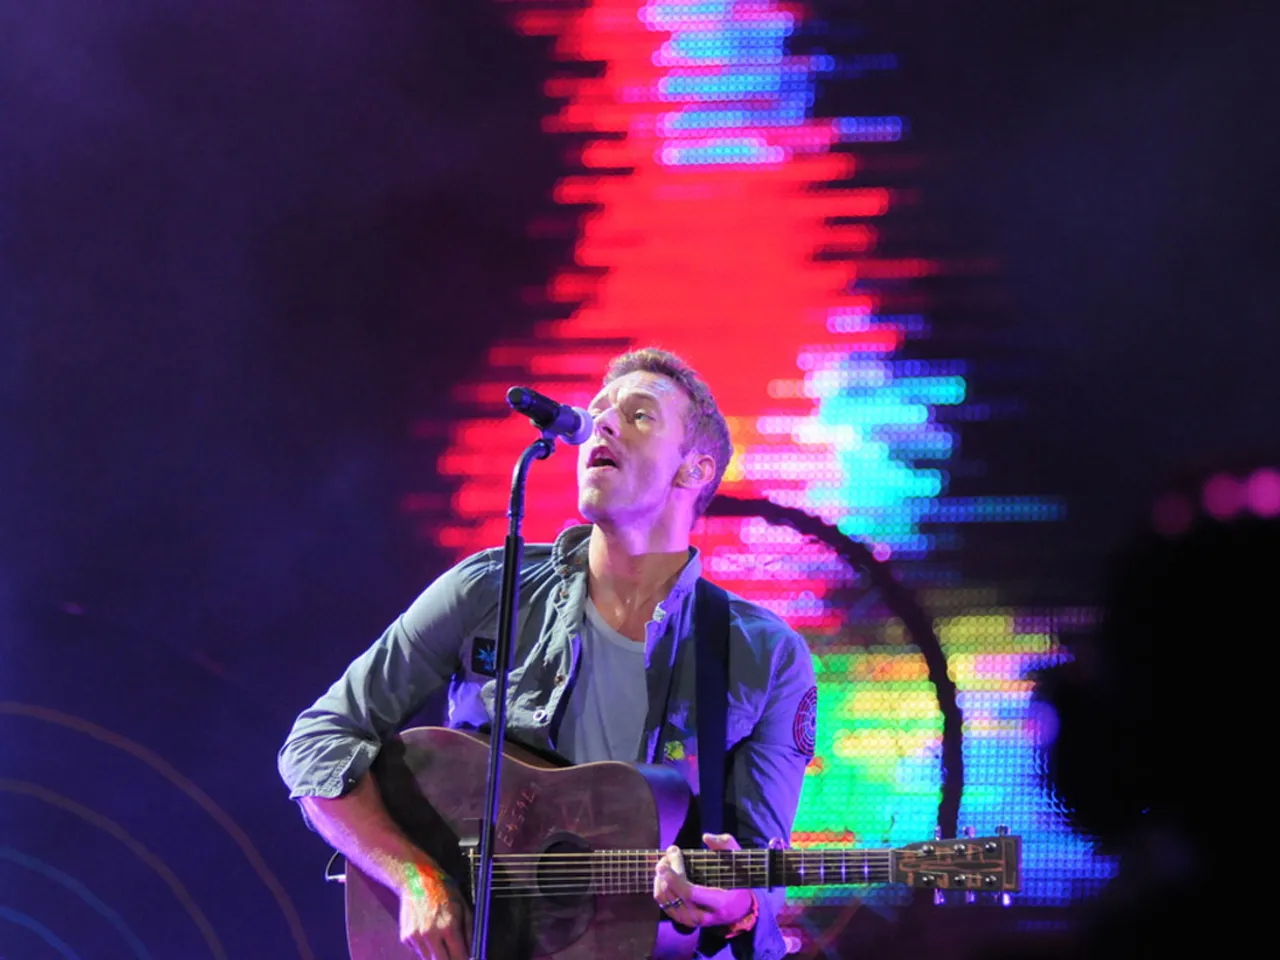 Twitter witnesses Adventure of a lifetime as Coldplay fans vent out